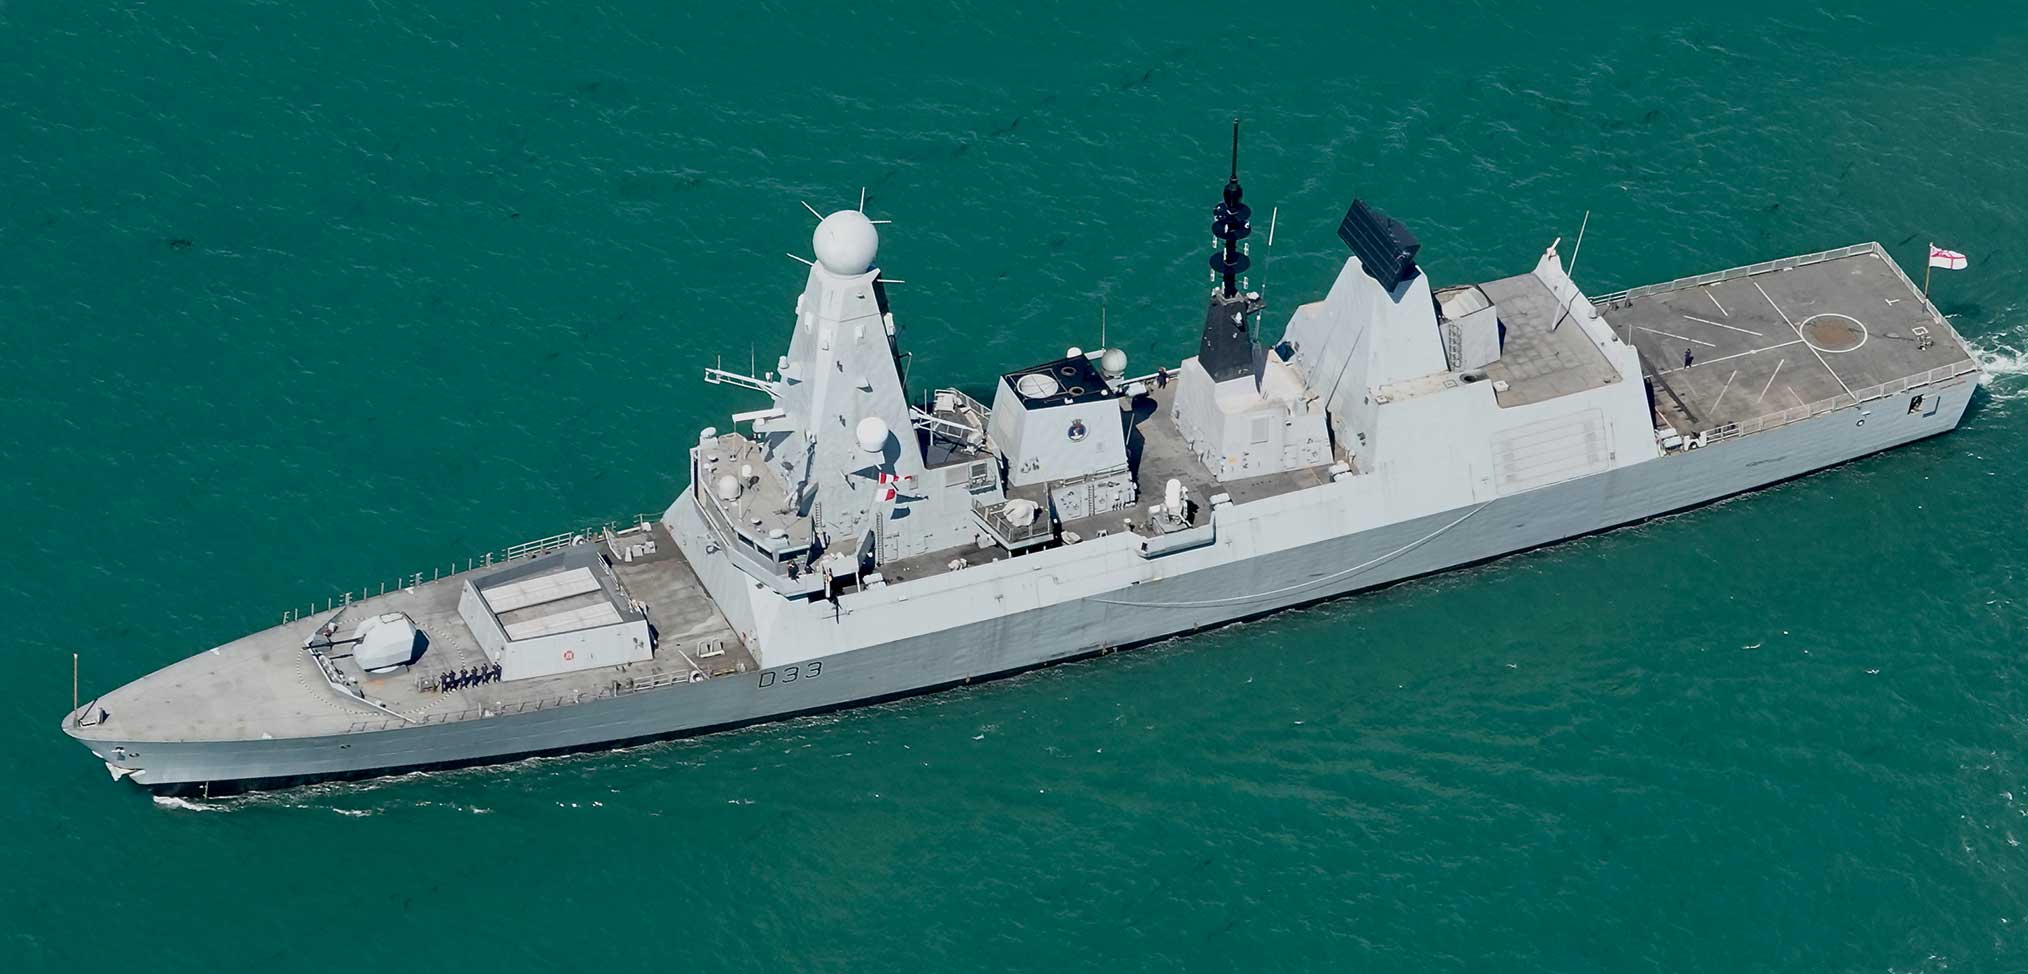 In focus: The Power Improvement Project for the Royal Navy’s Type 45 destroyers